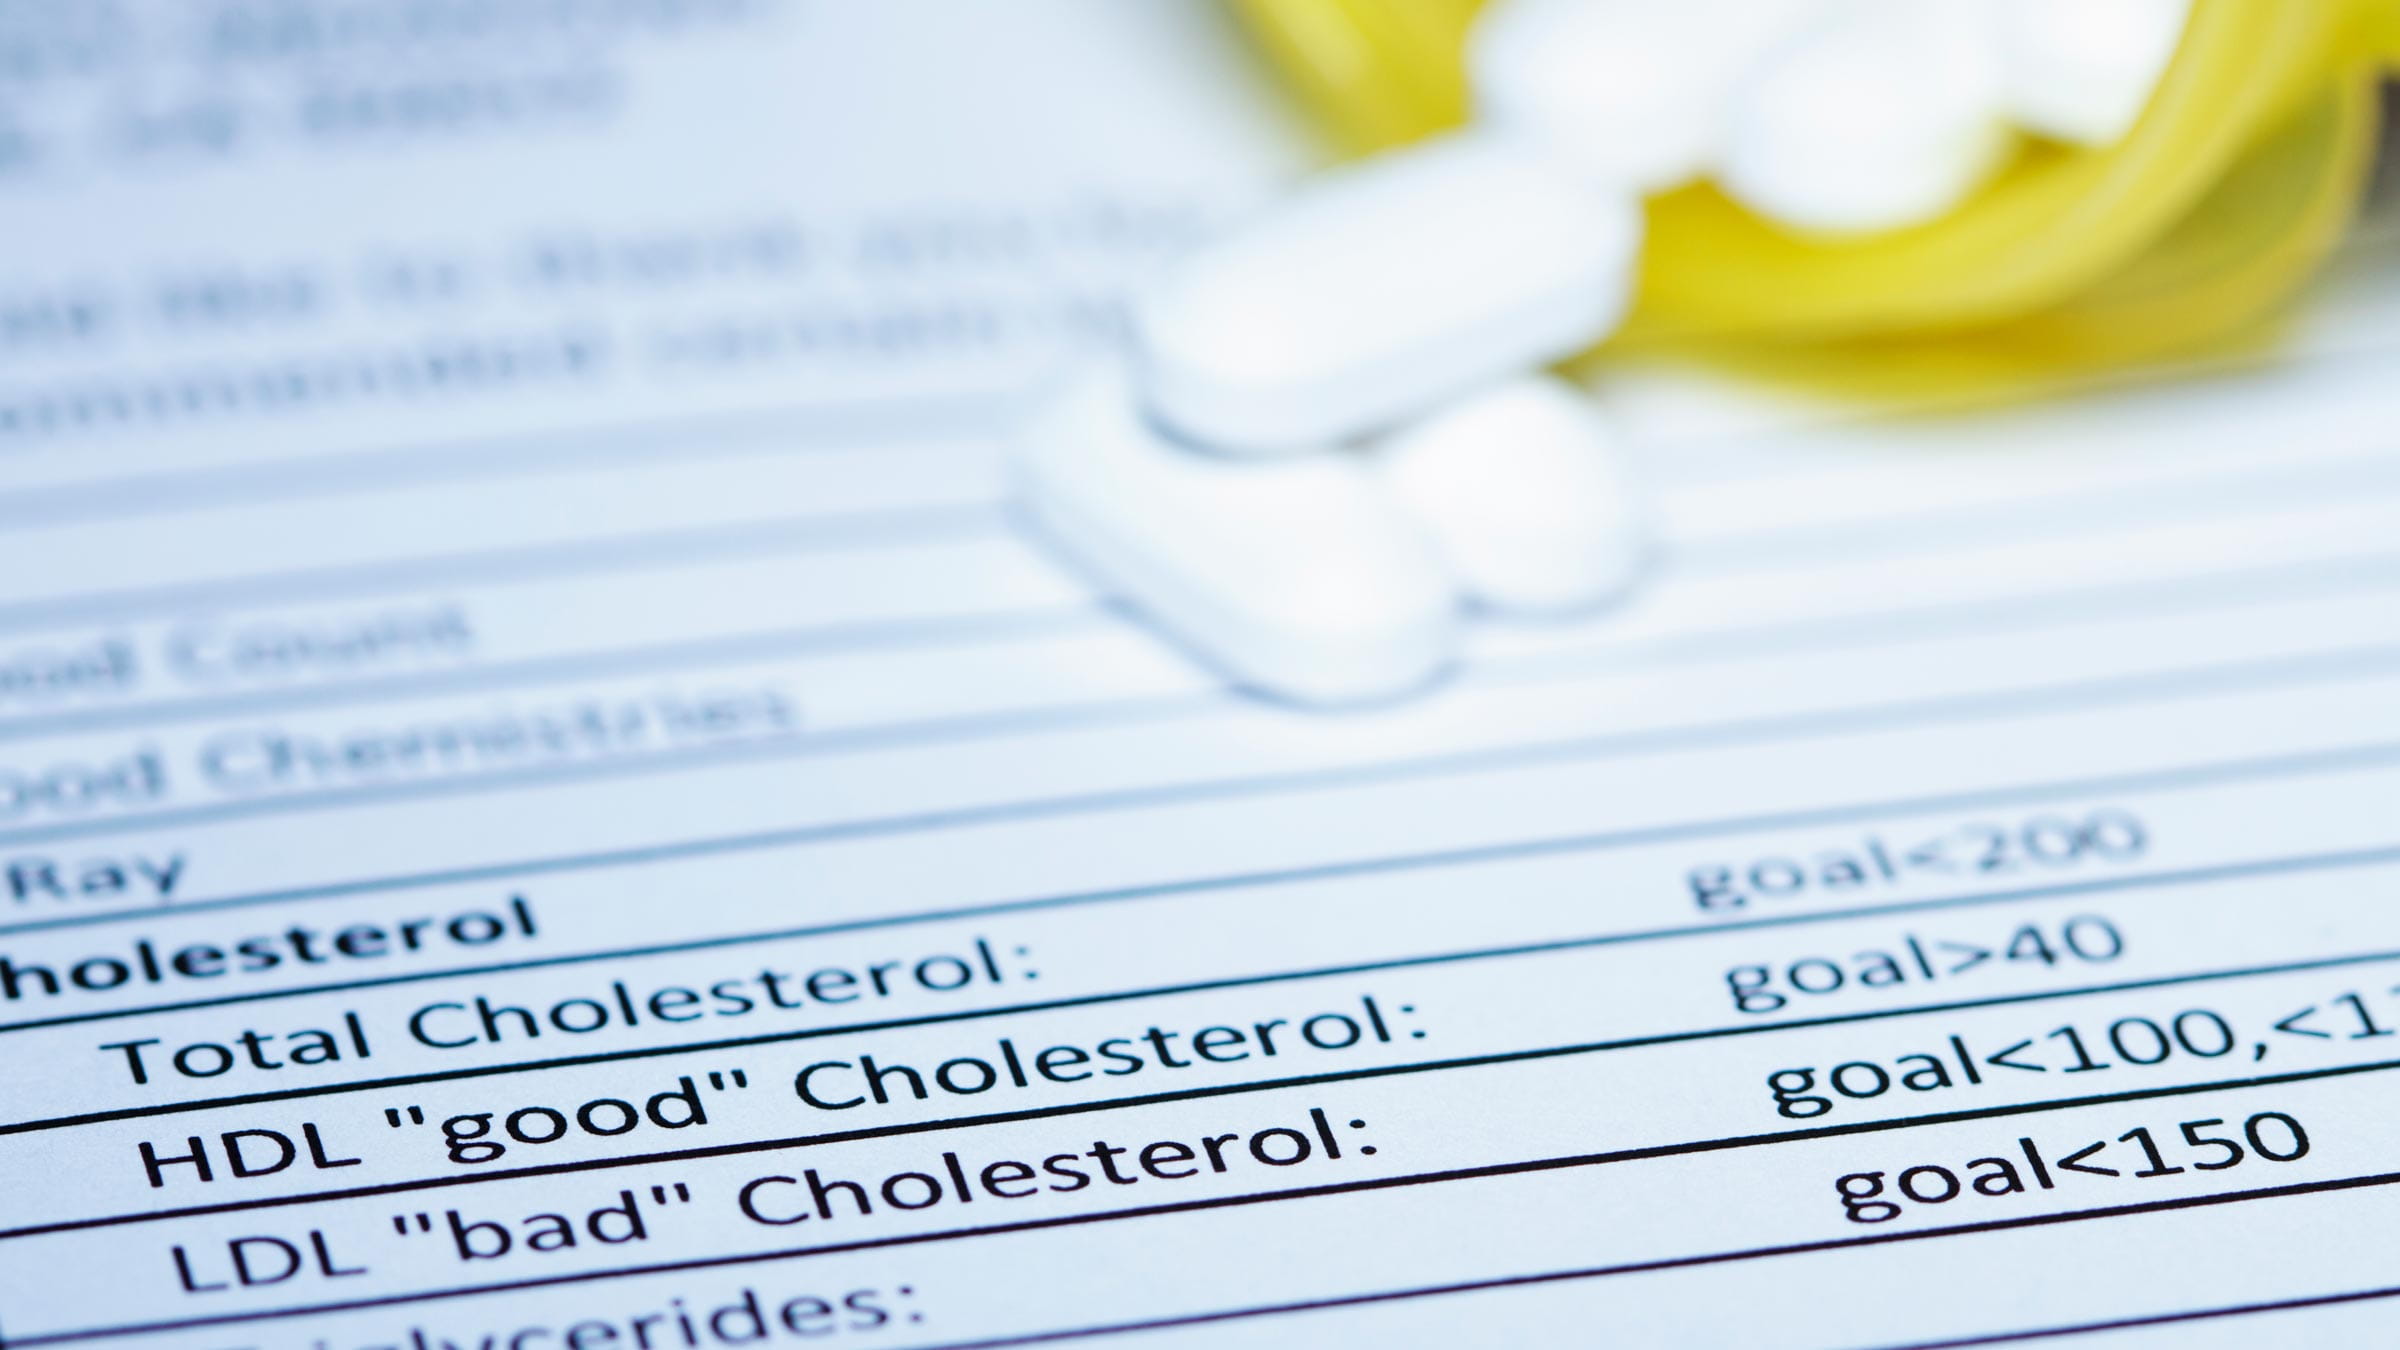 Pills on the results of blood testing, including testing for cholesterol